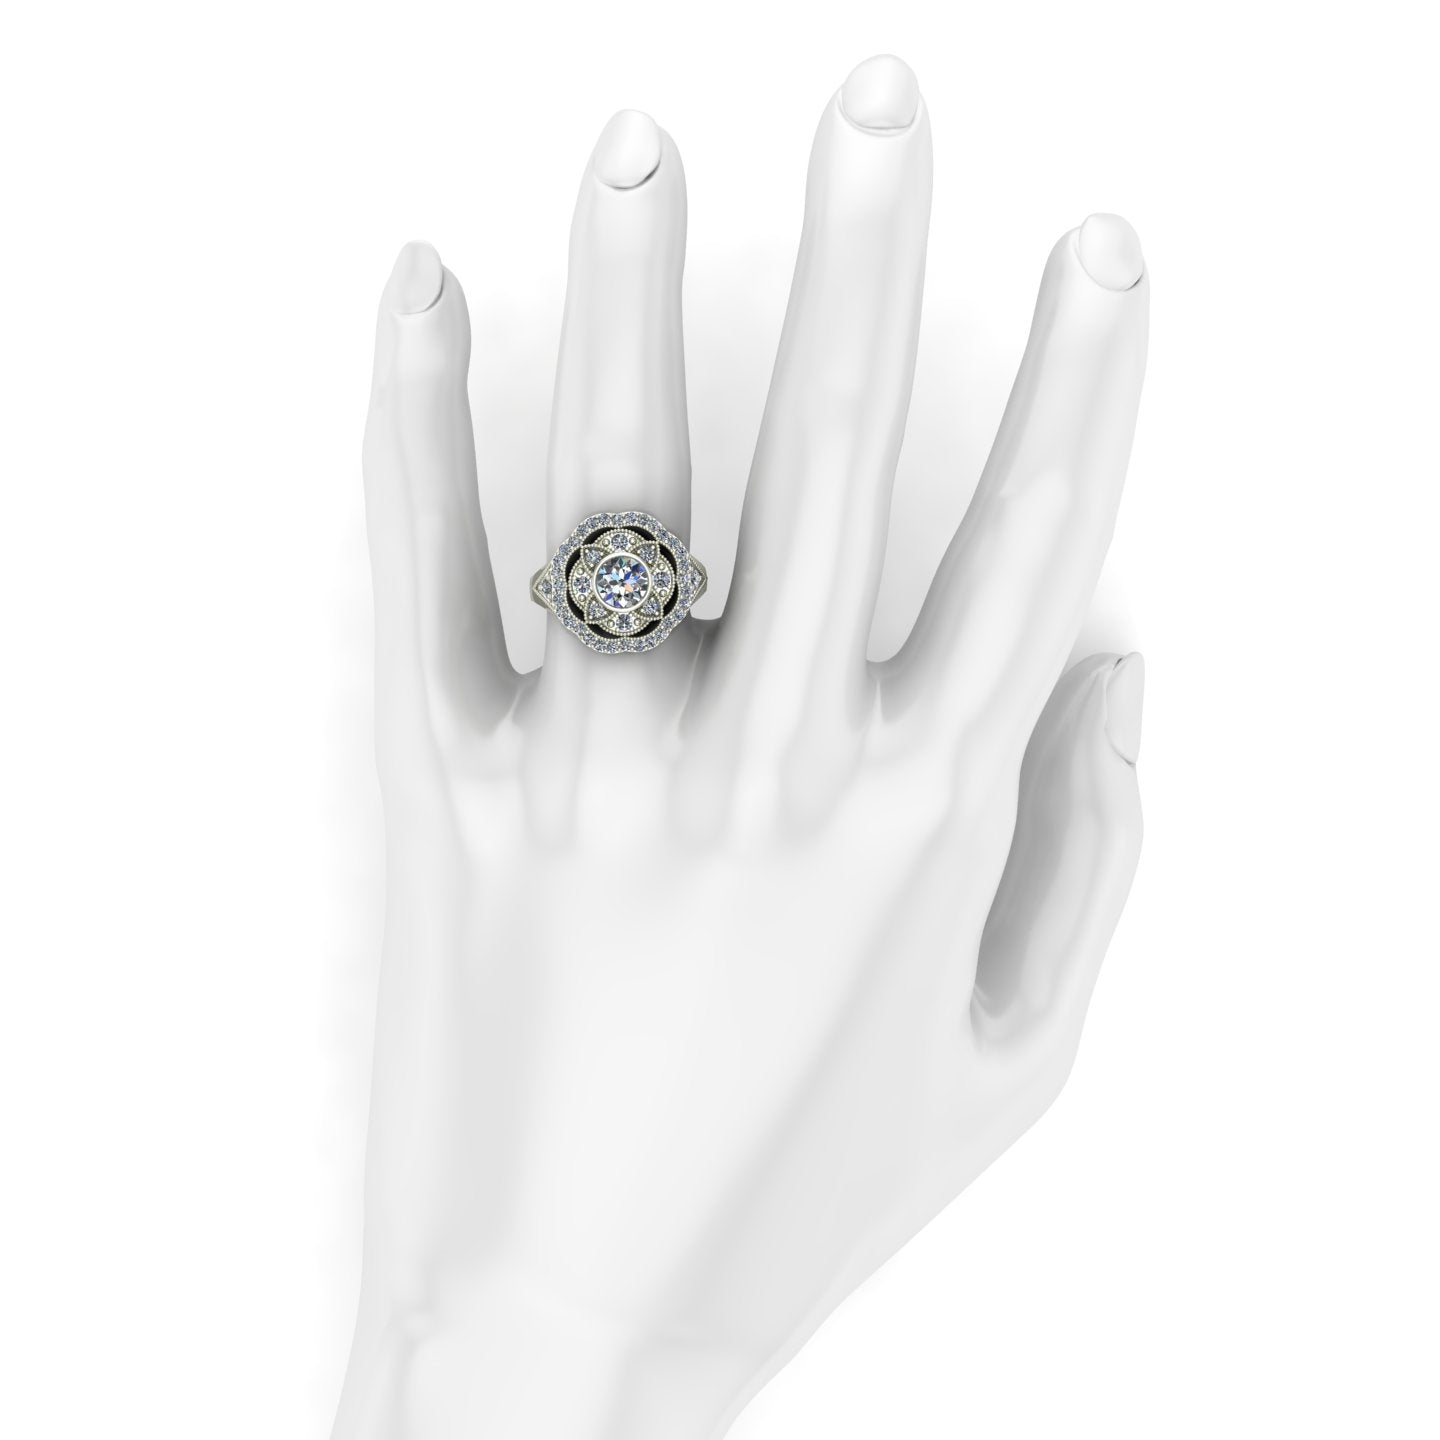 three quarter carat bezel set diamond right hand ring with a vintage look in 14k white gold - Charles Babb Designs - on hand